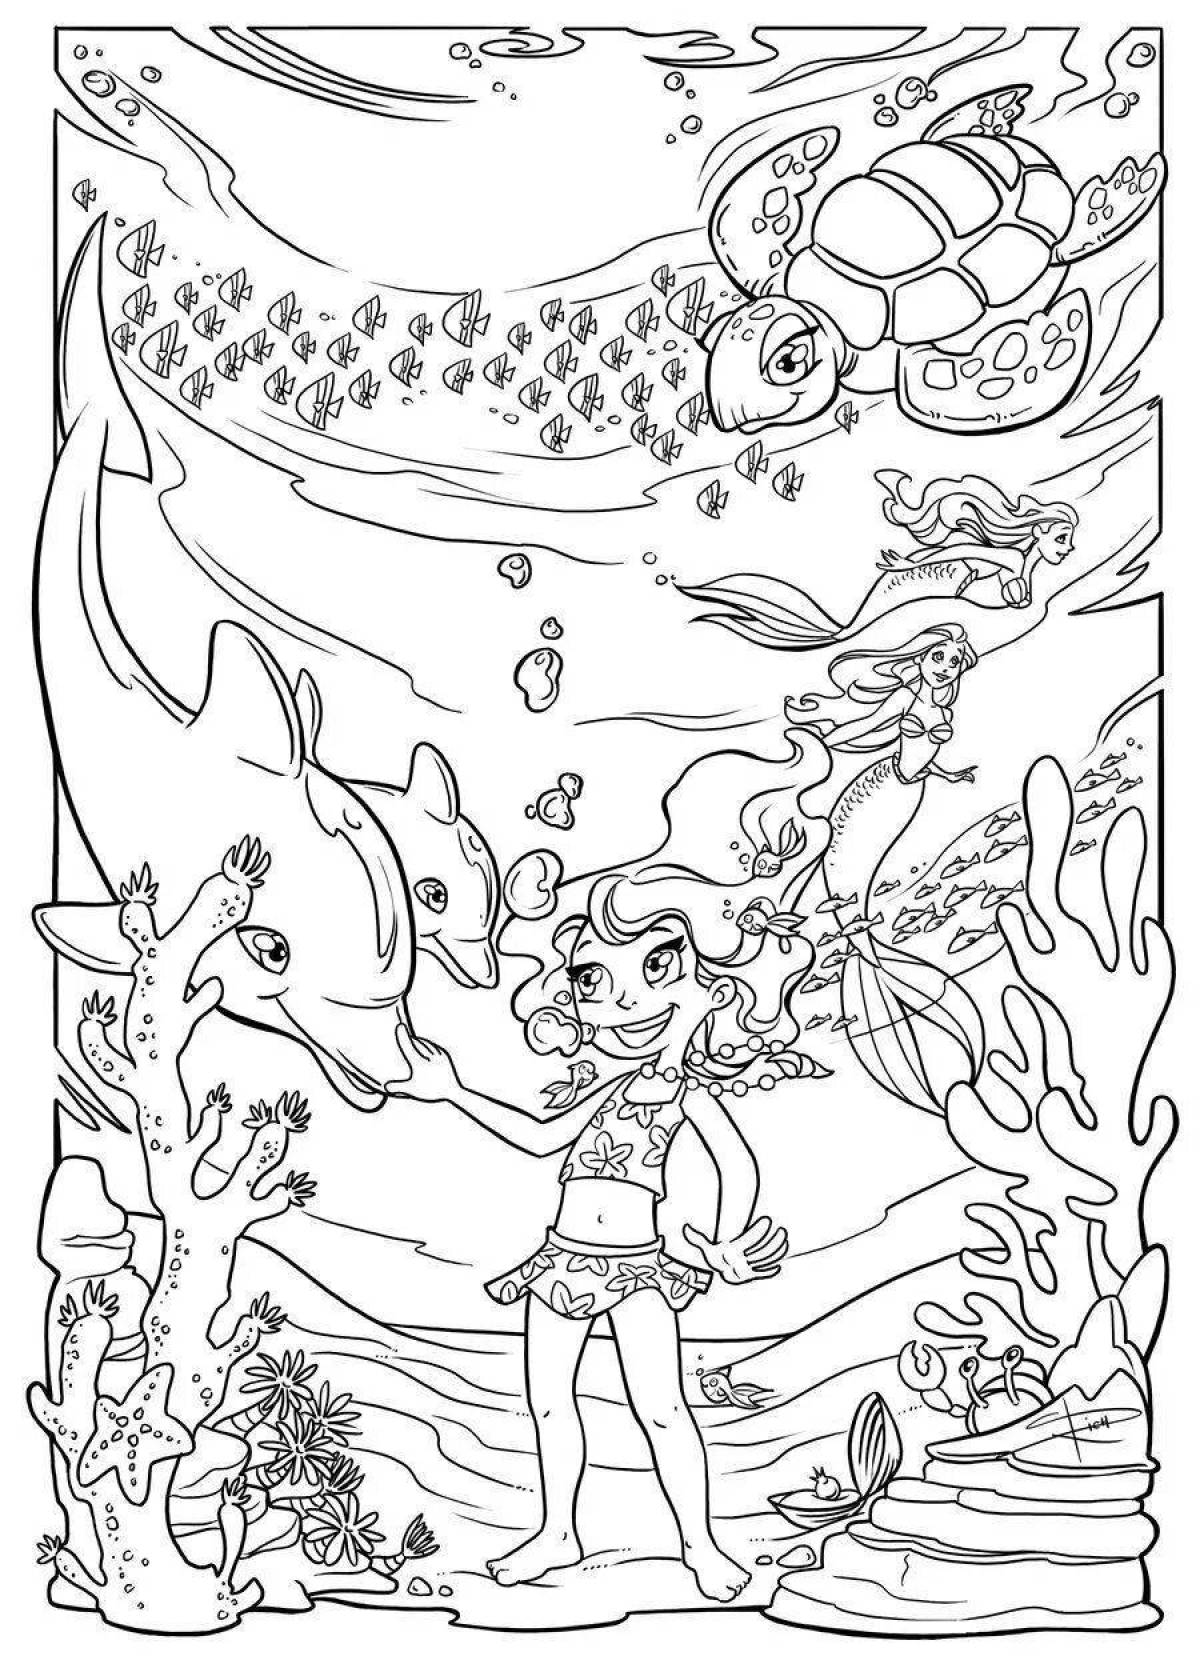 Coloring page inviting water world